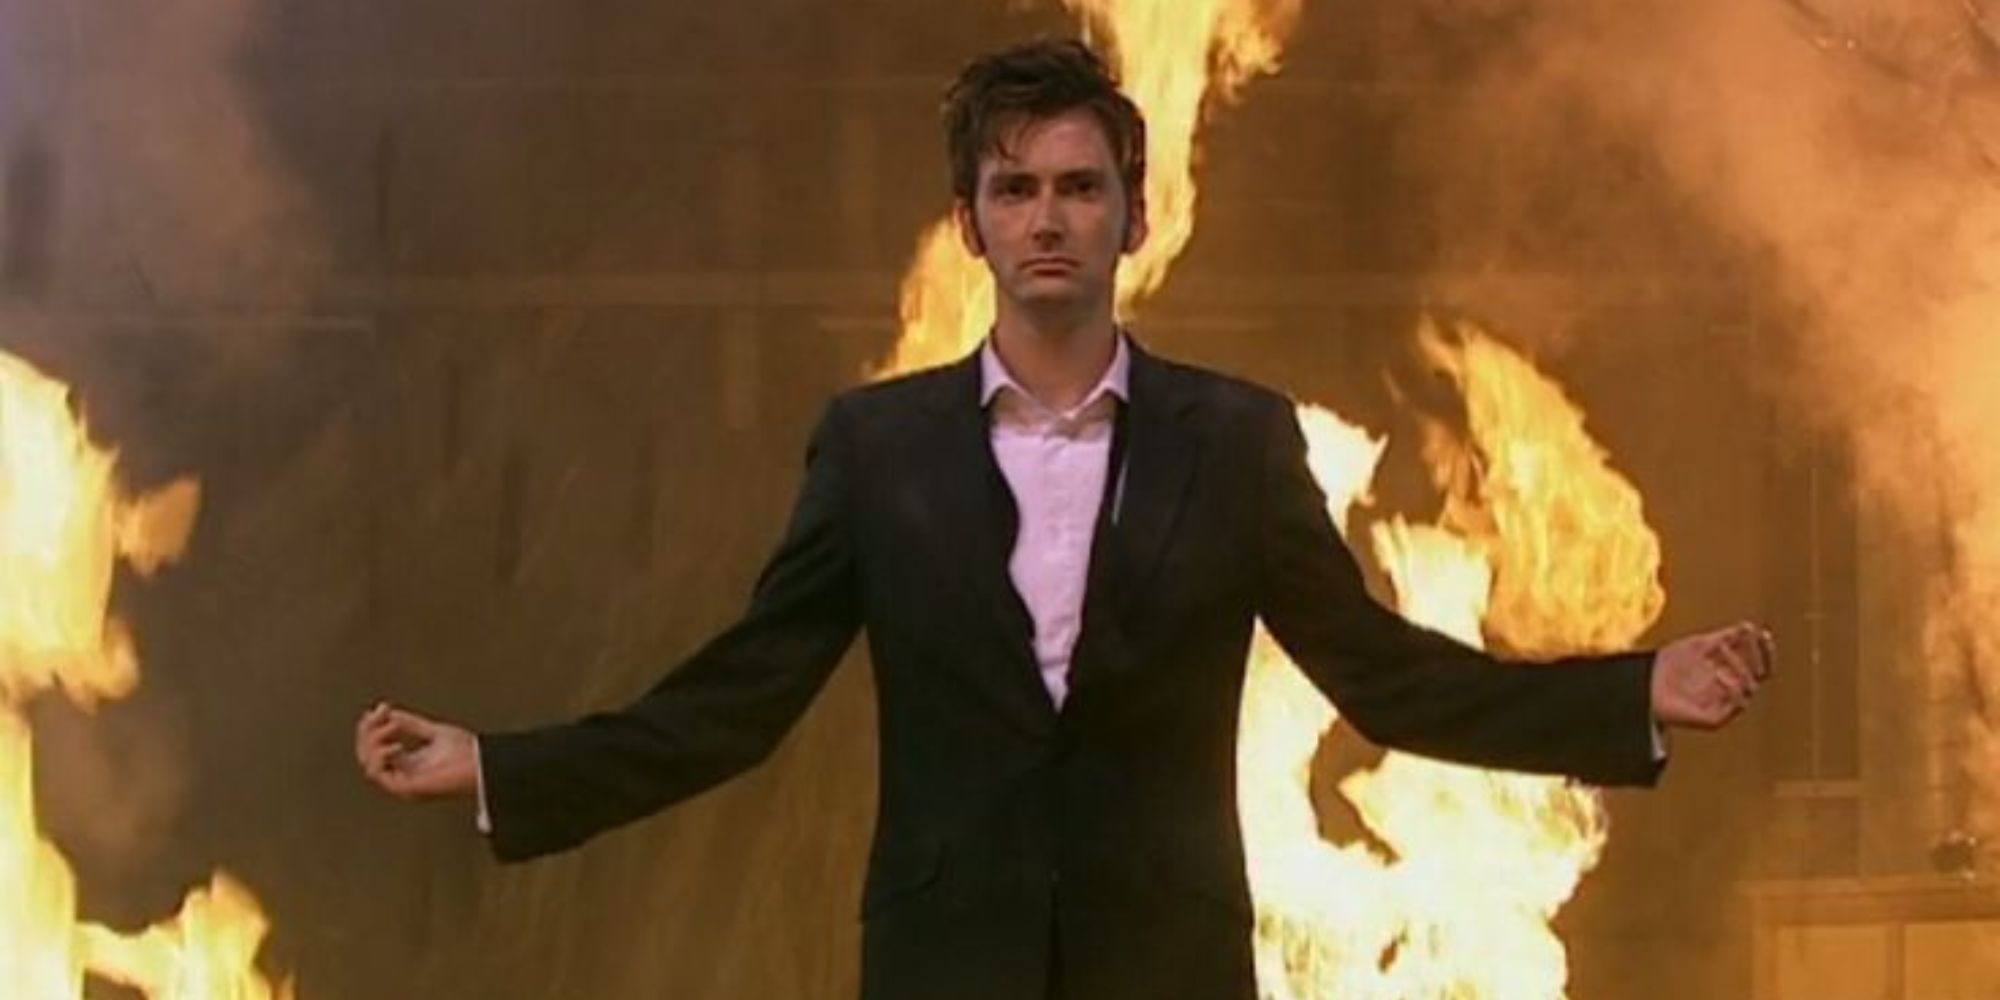 10th Doctor in a tuxedo with his arms outstretched surrounded by fire